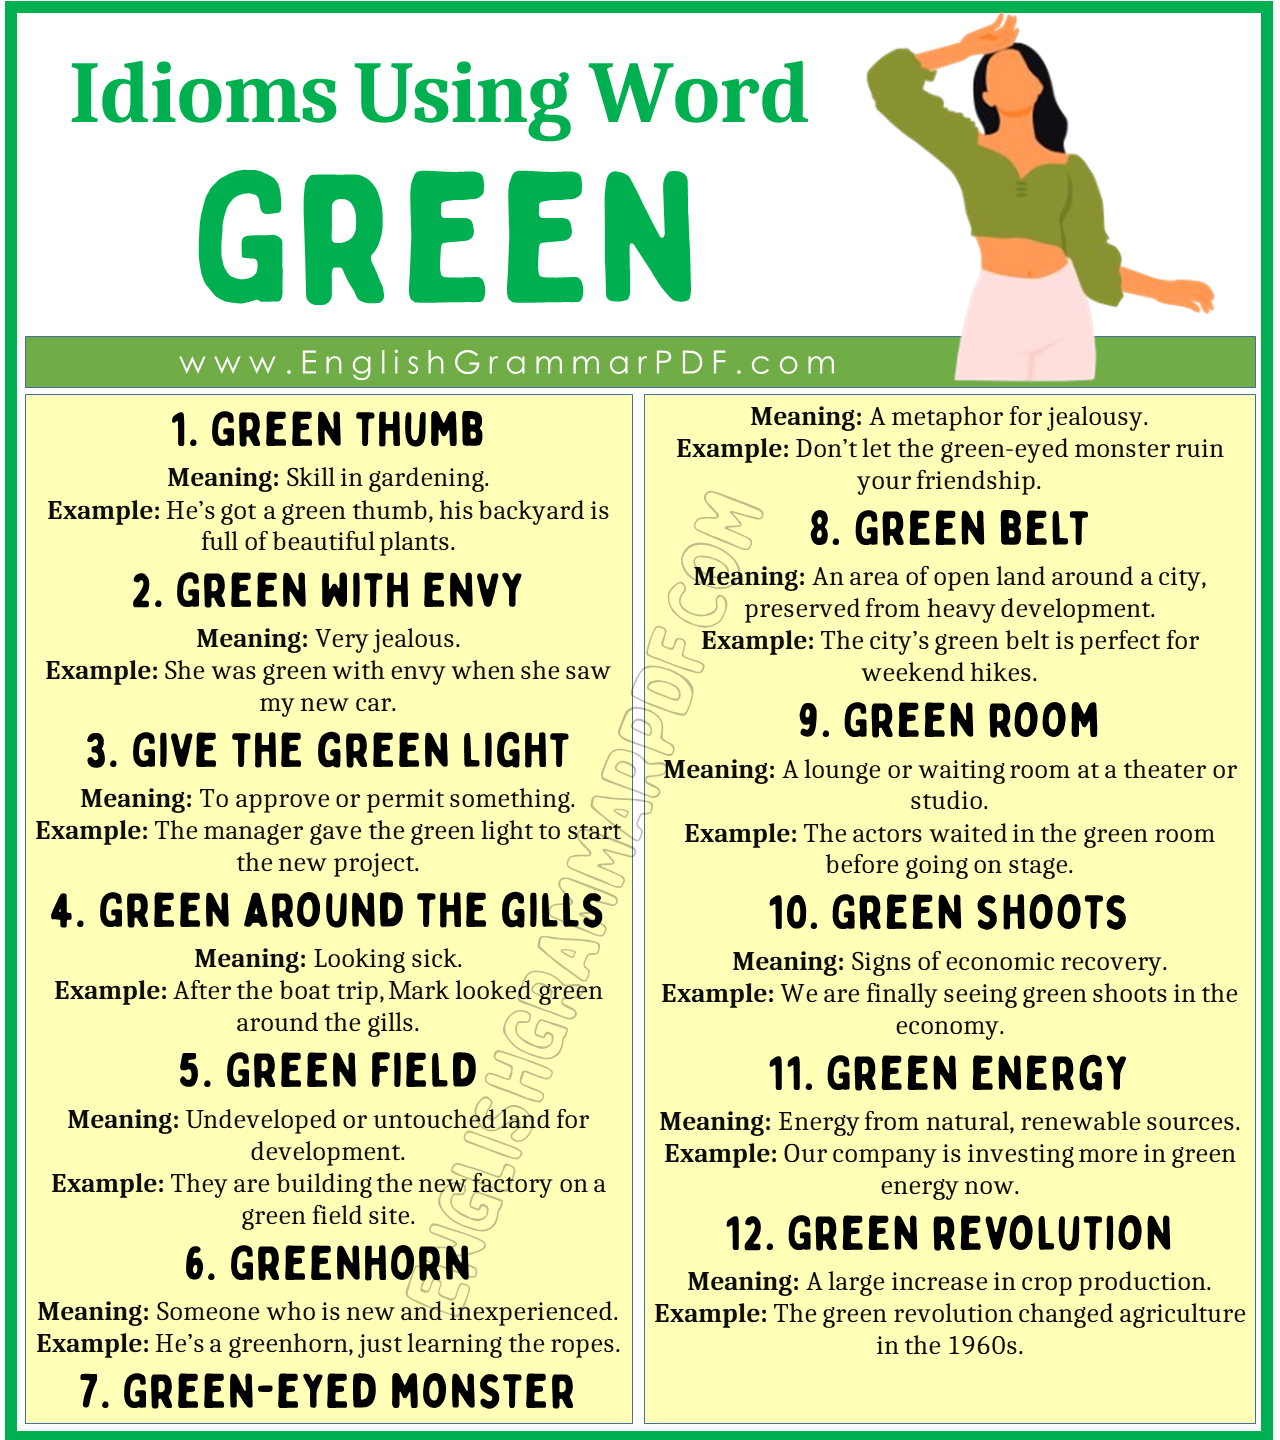 Idioms Using the Word Green